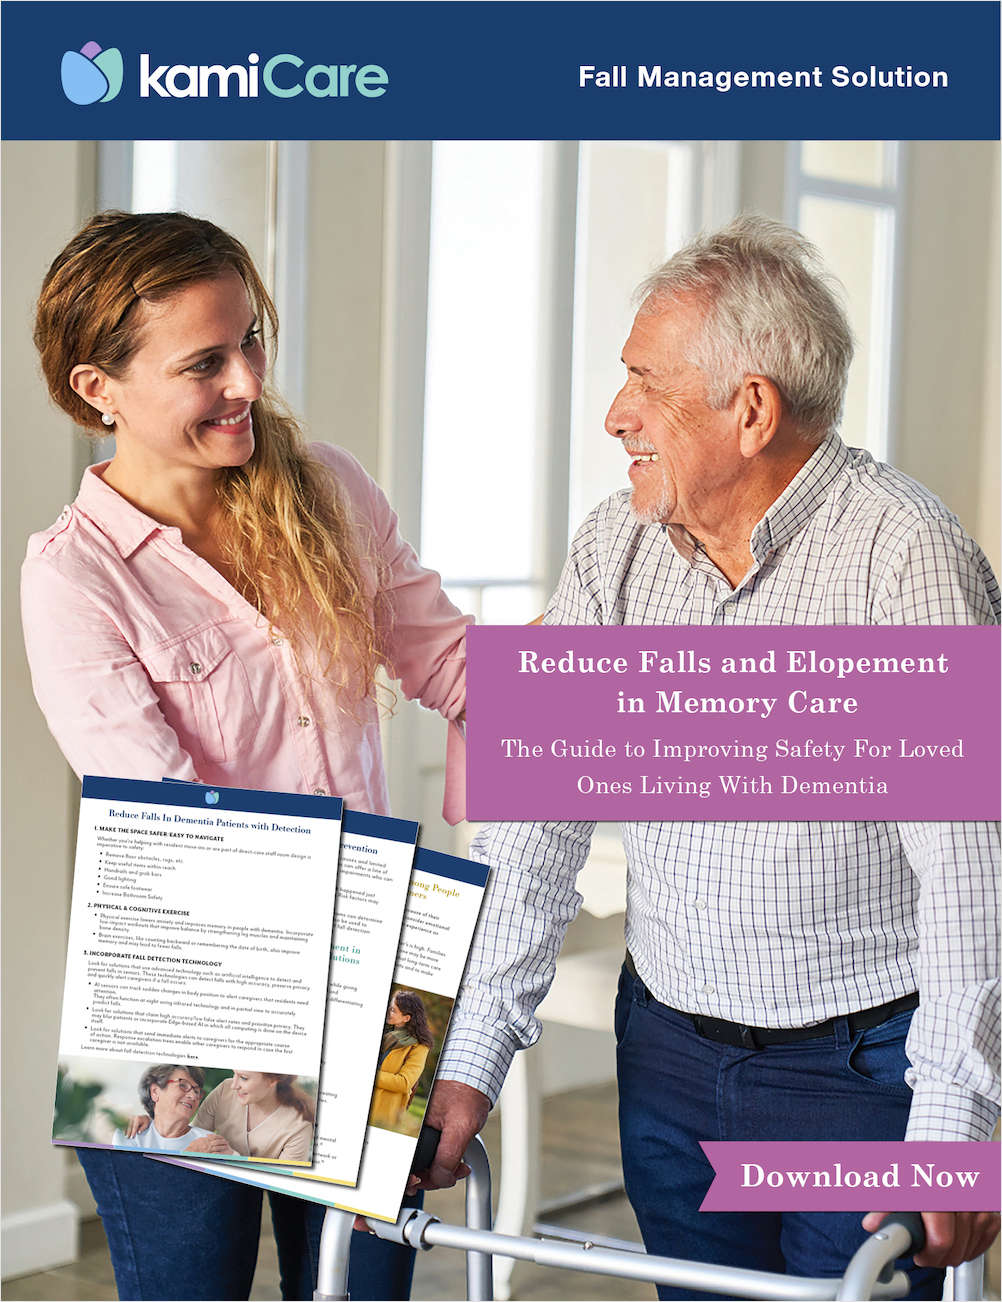 Reducing Fall and Elopement Risks in Memory Care Facilities: The Guide to Improving Safety, Security and Peace of Mind For Loved Ones Living With Dementia